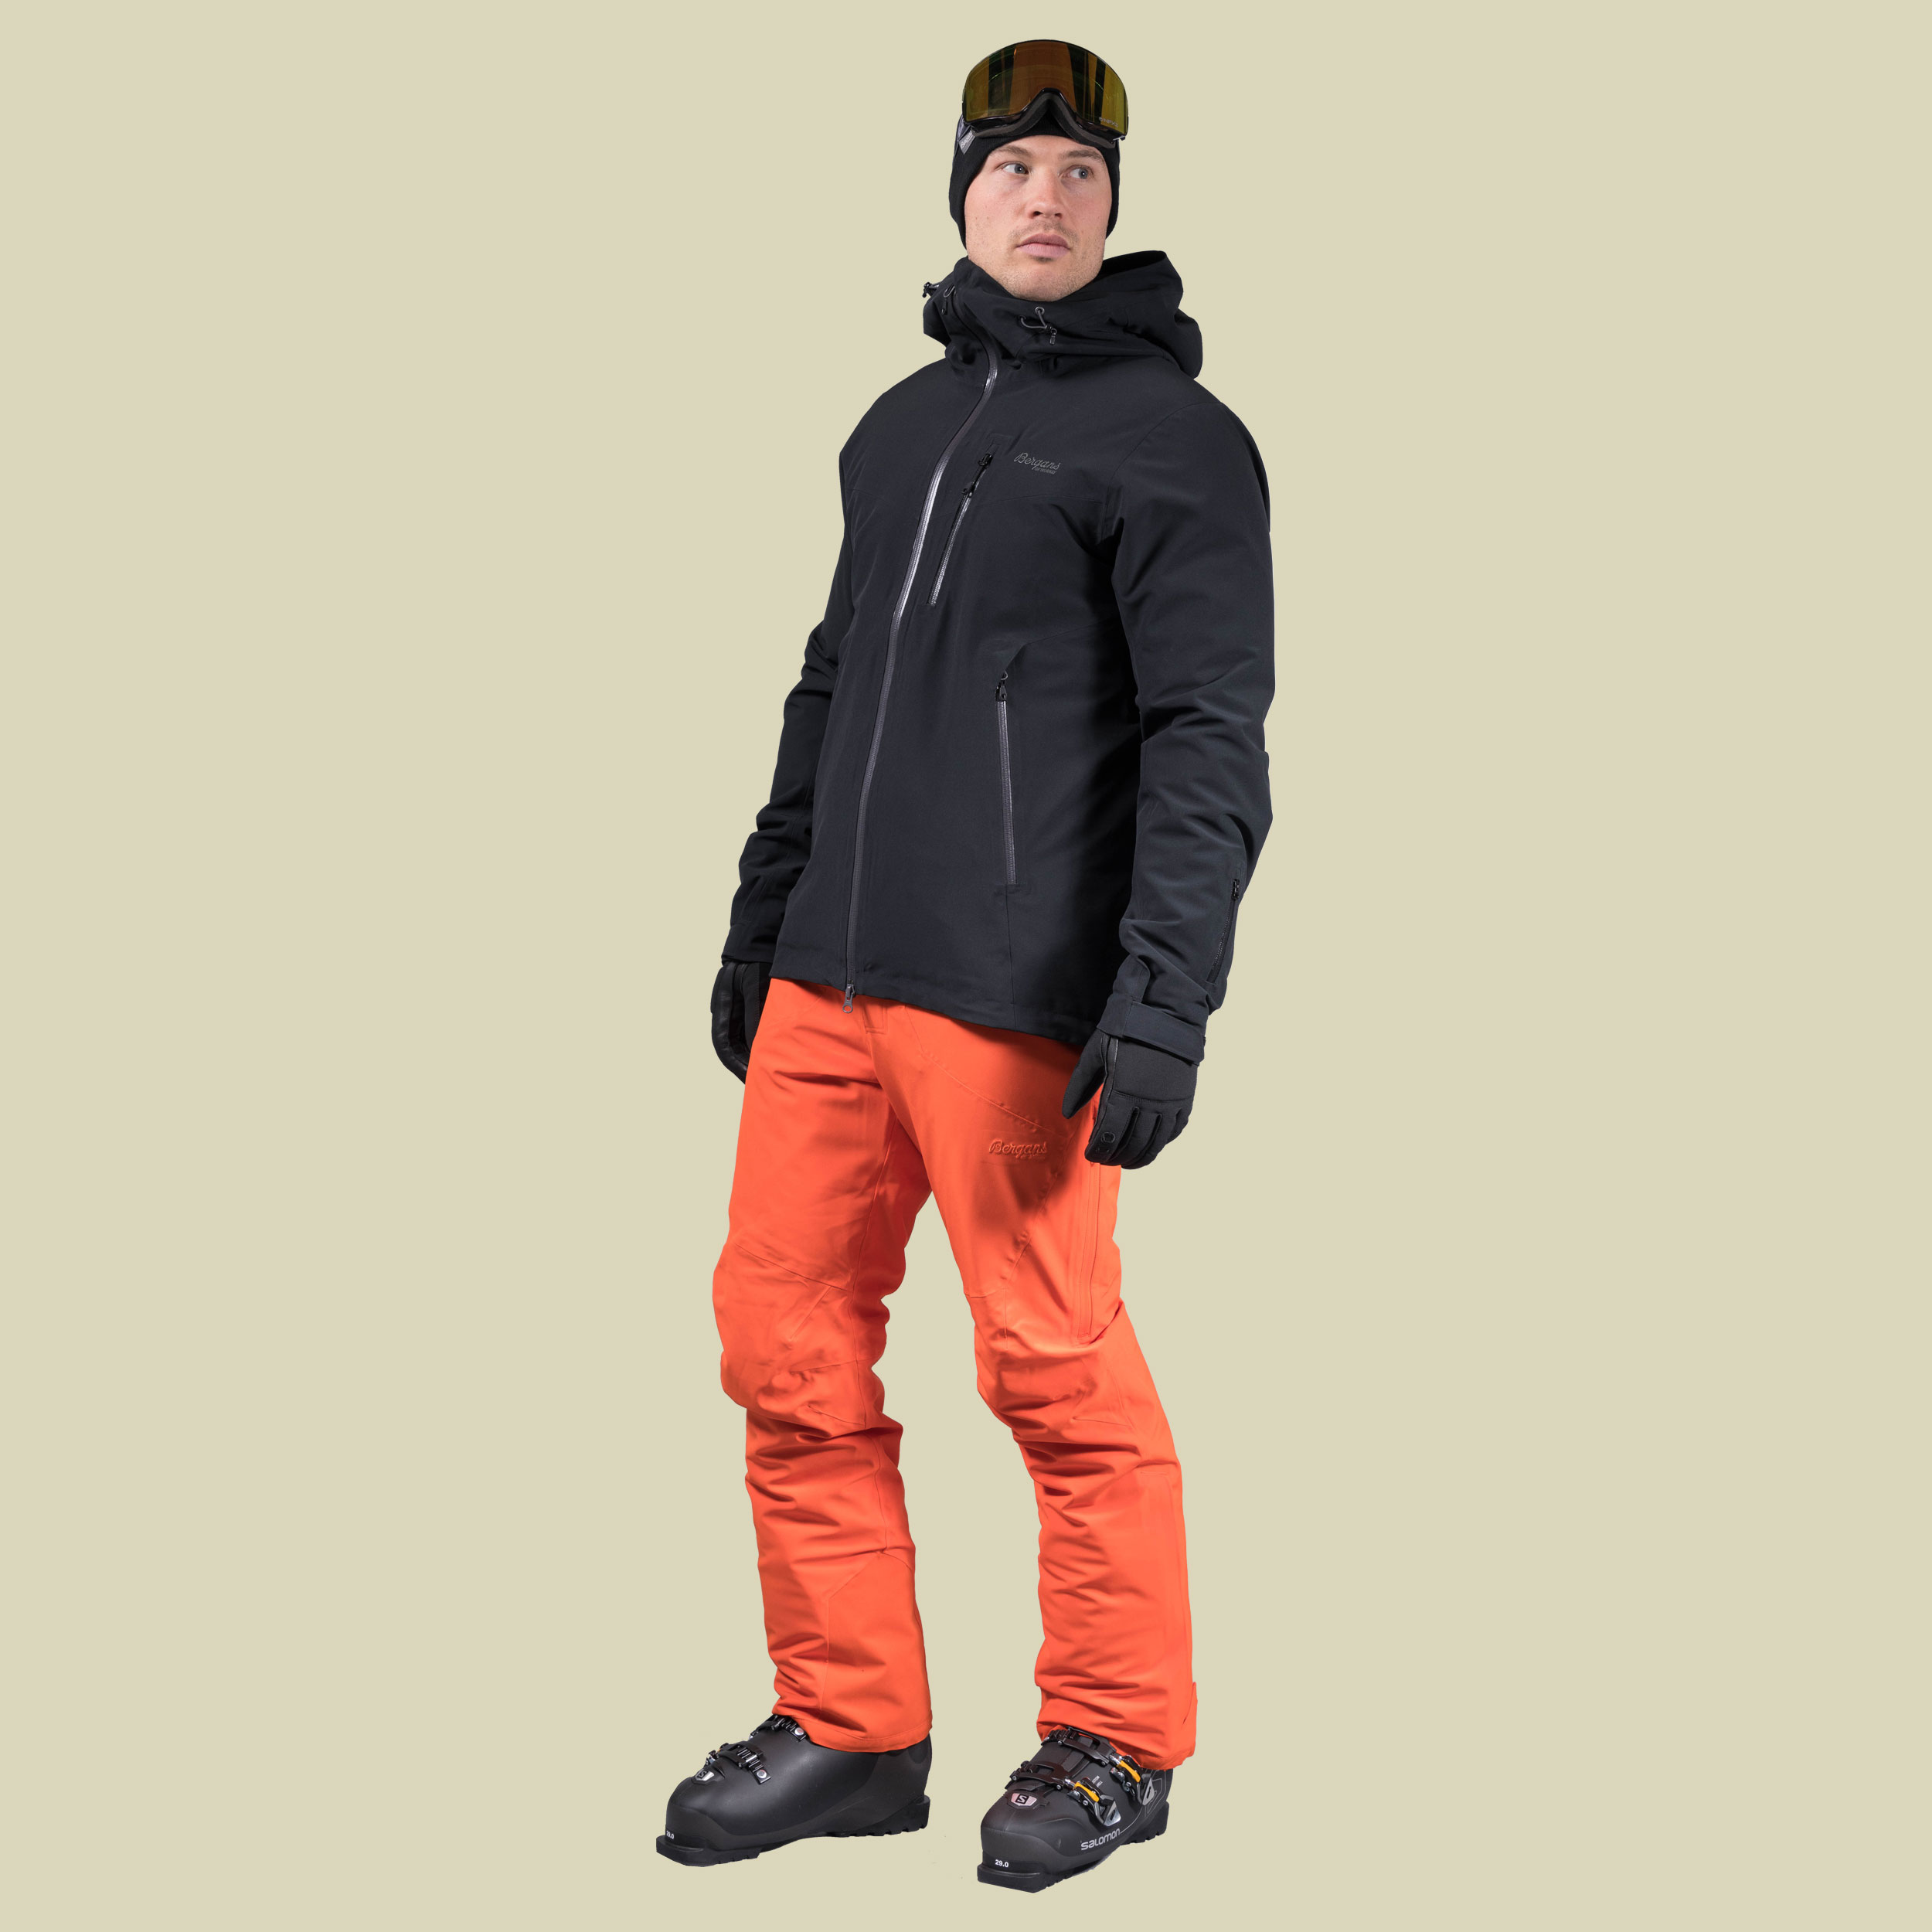 Oppdal Insulated Jacket Men Größe M  Farbe black/solid charcoal